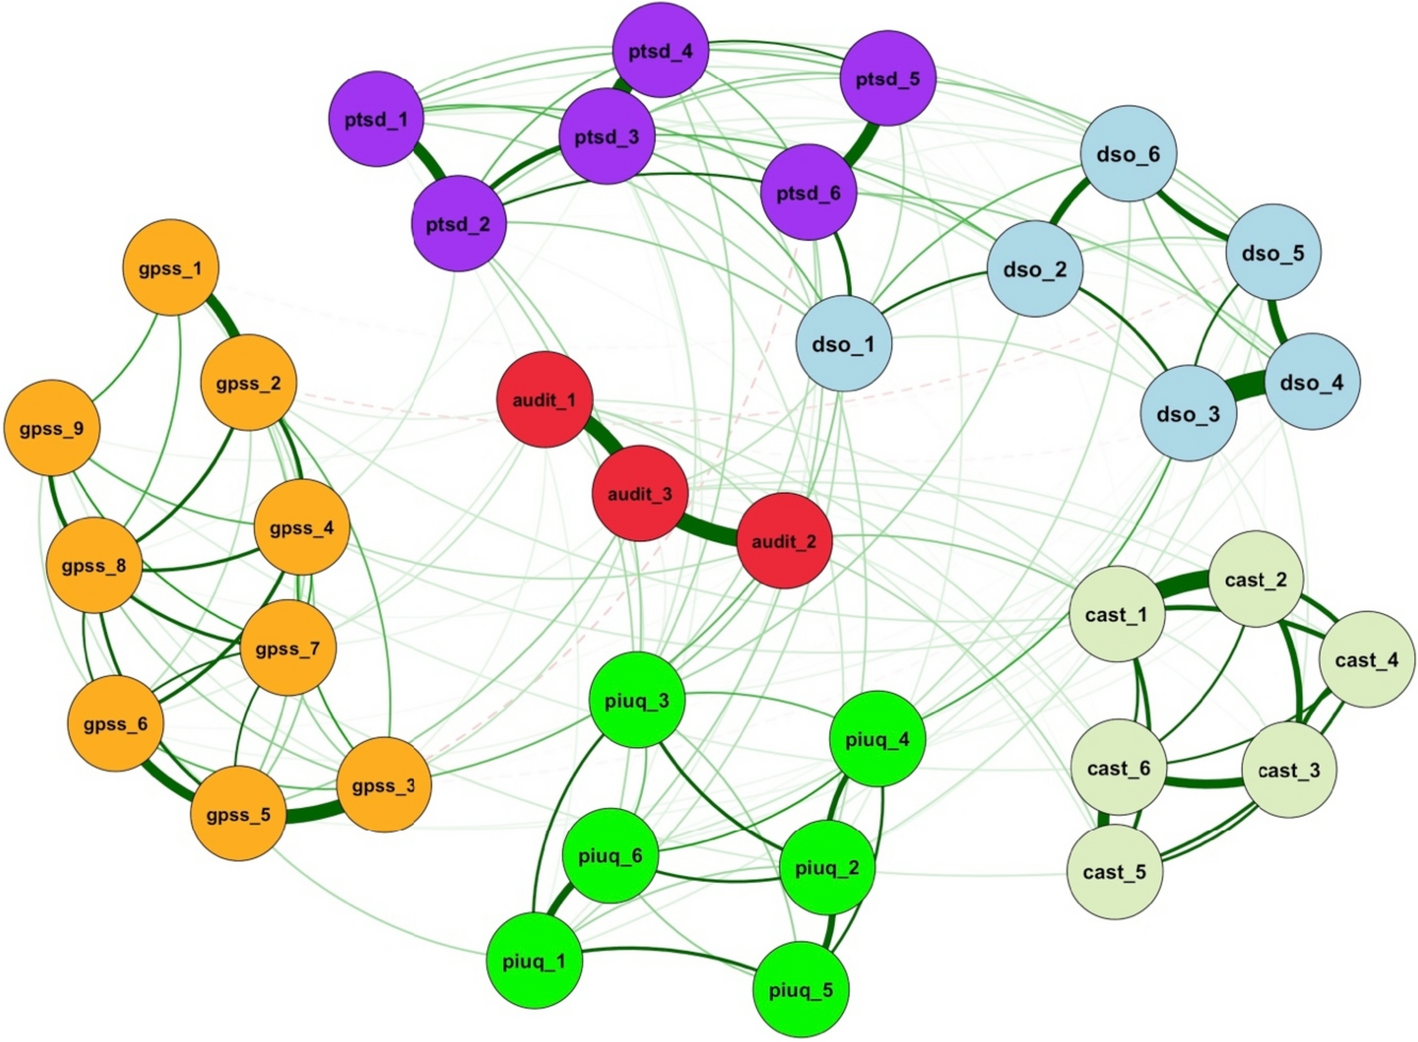 Unraveling the Link Between Complex Post-traumatic Stress Symptoms and Addictive Behaviors in Adolescents: A Network Analysis